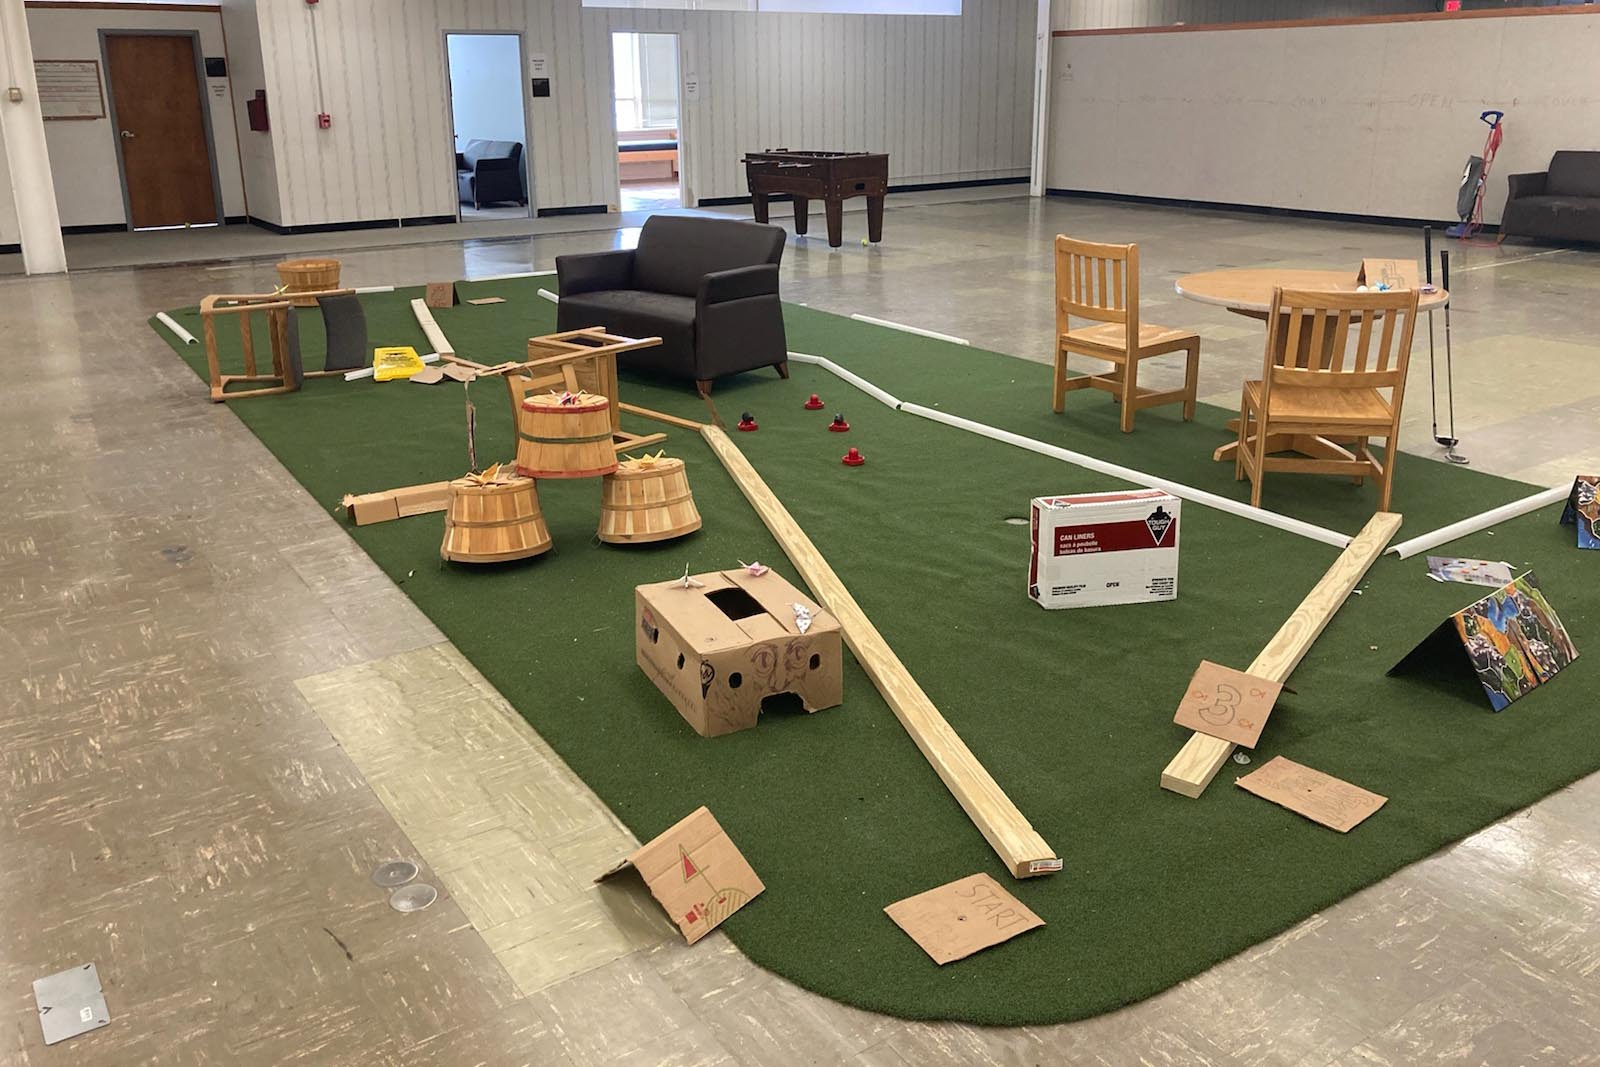 768x512 mini golf course with homemade obstacles